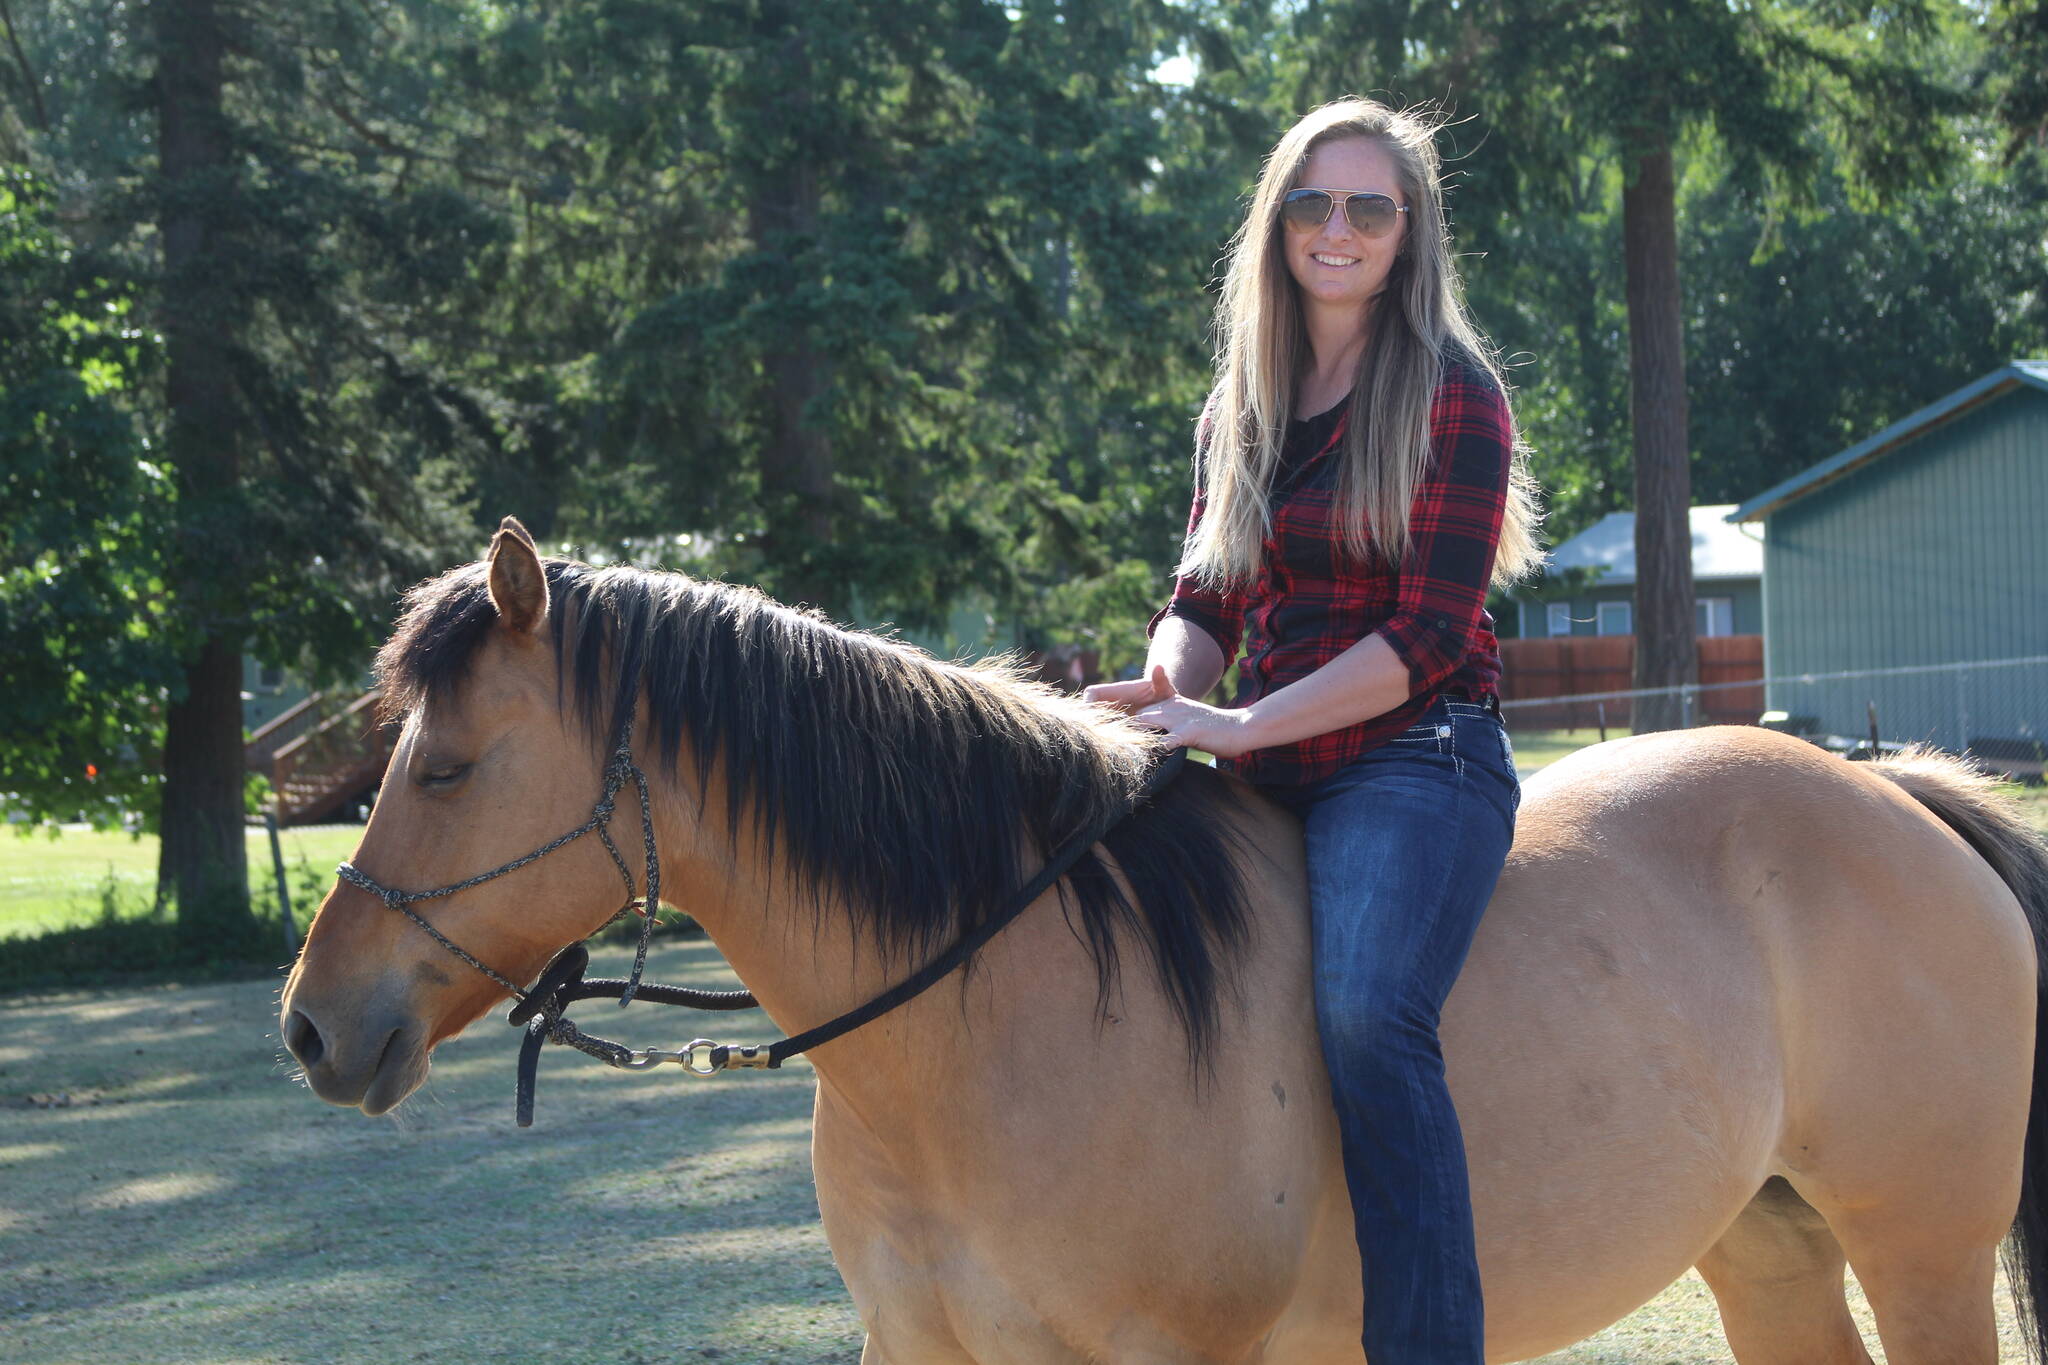 Photo by Karina Andrew/Whidbey News-Times
Shannon Ivins rides her horse, Apache.